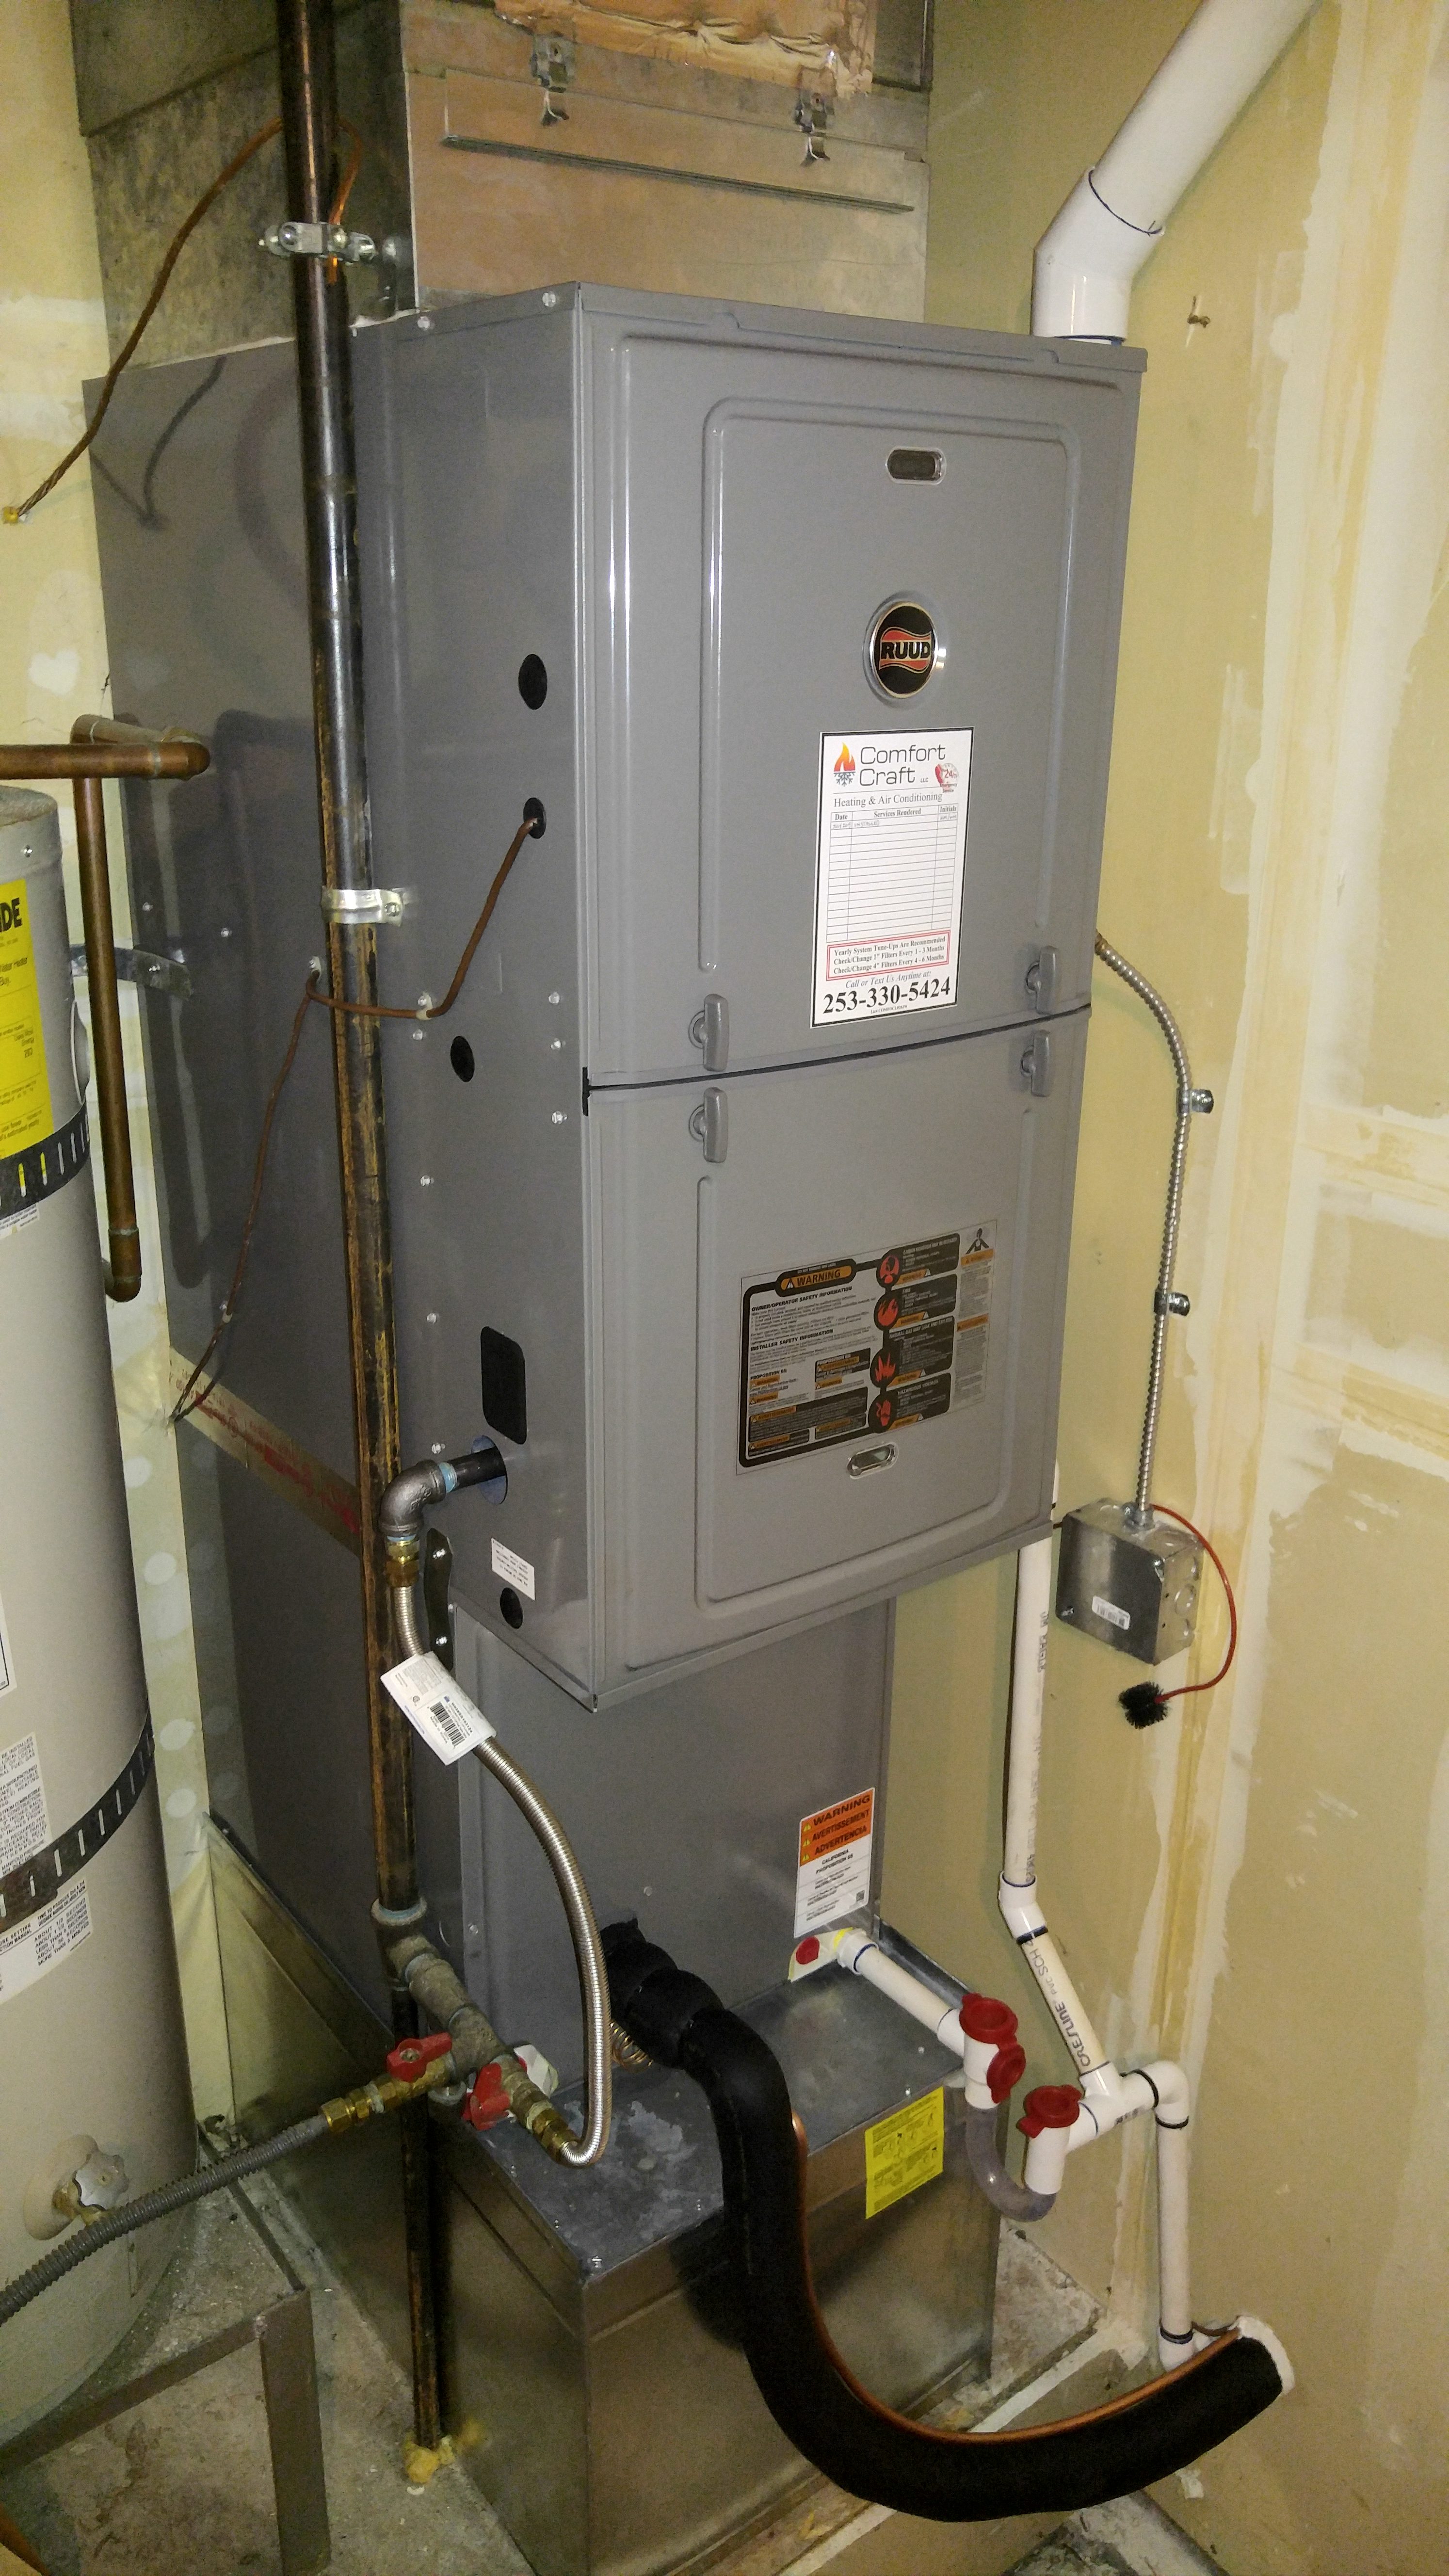 Ruud Gas Furnace with A/C – Comfort Craft LLC